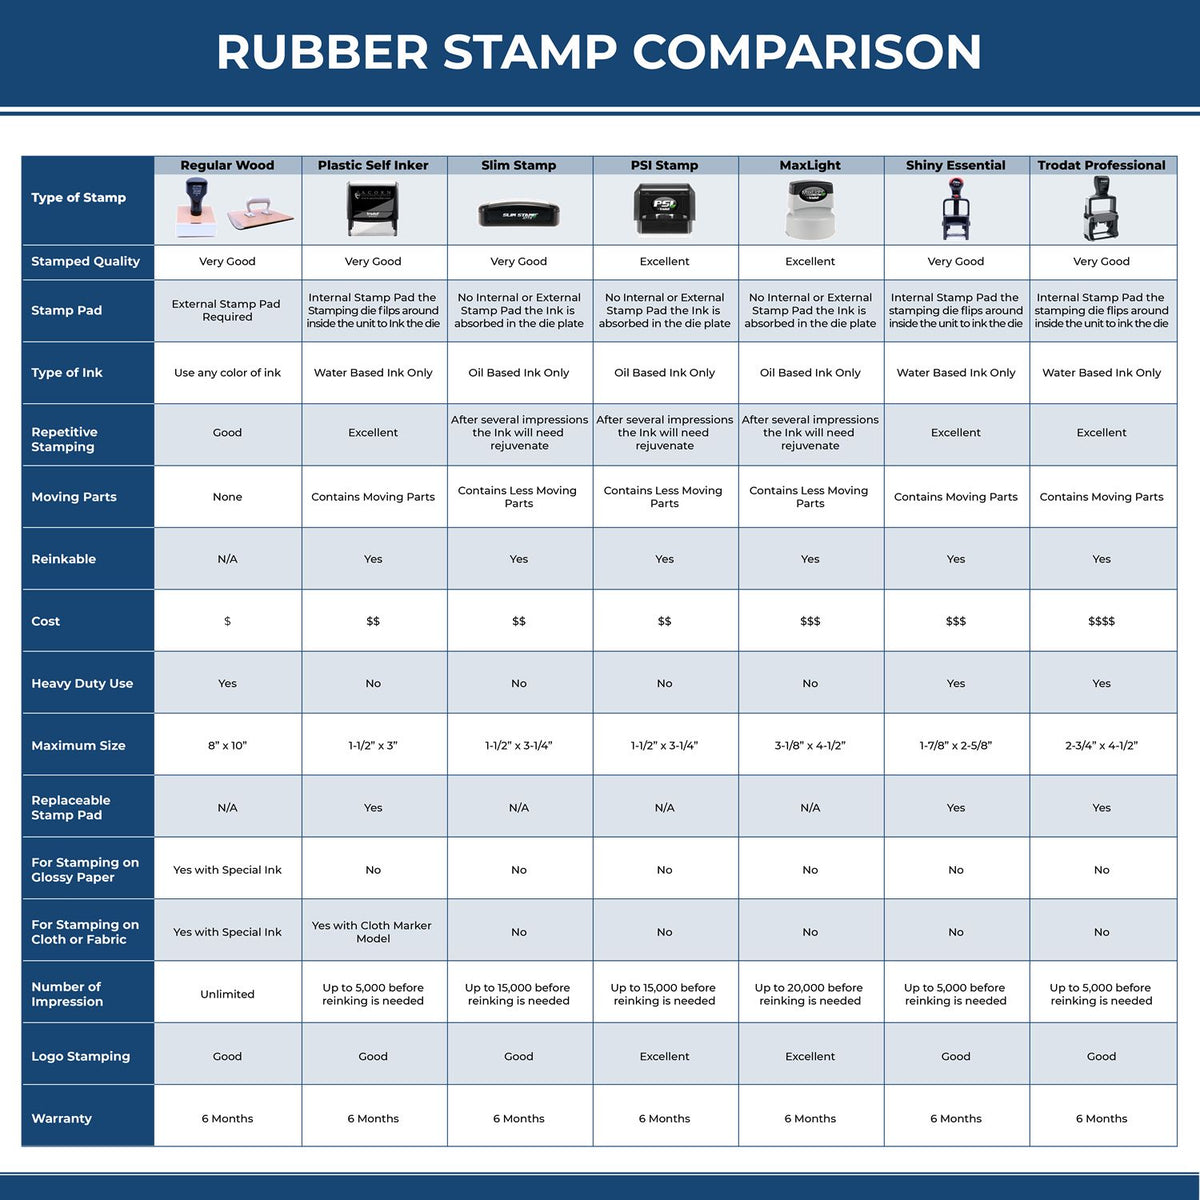 A comparison chart for the different types of mount models available for the Heavy-Duty Mississippi Rectangular Notary Stamp.